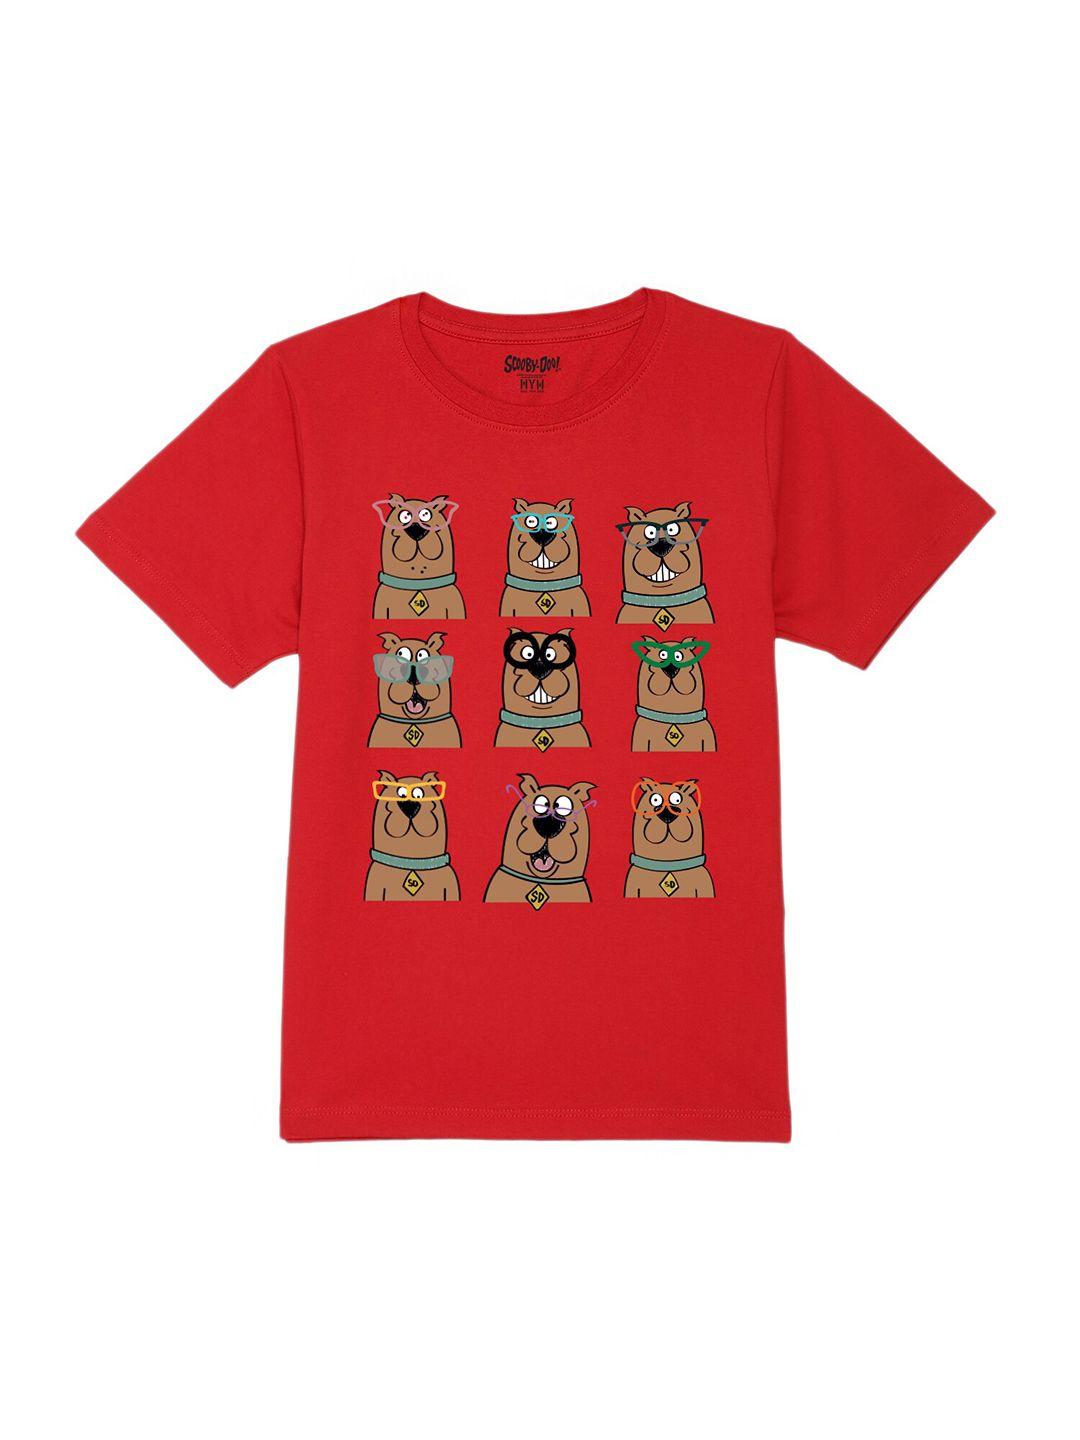 wear your mind boys scooby doo printed pure cotton t-shirt